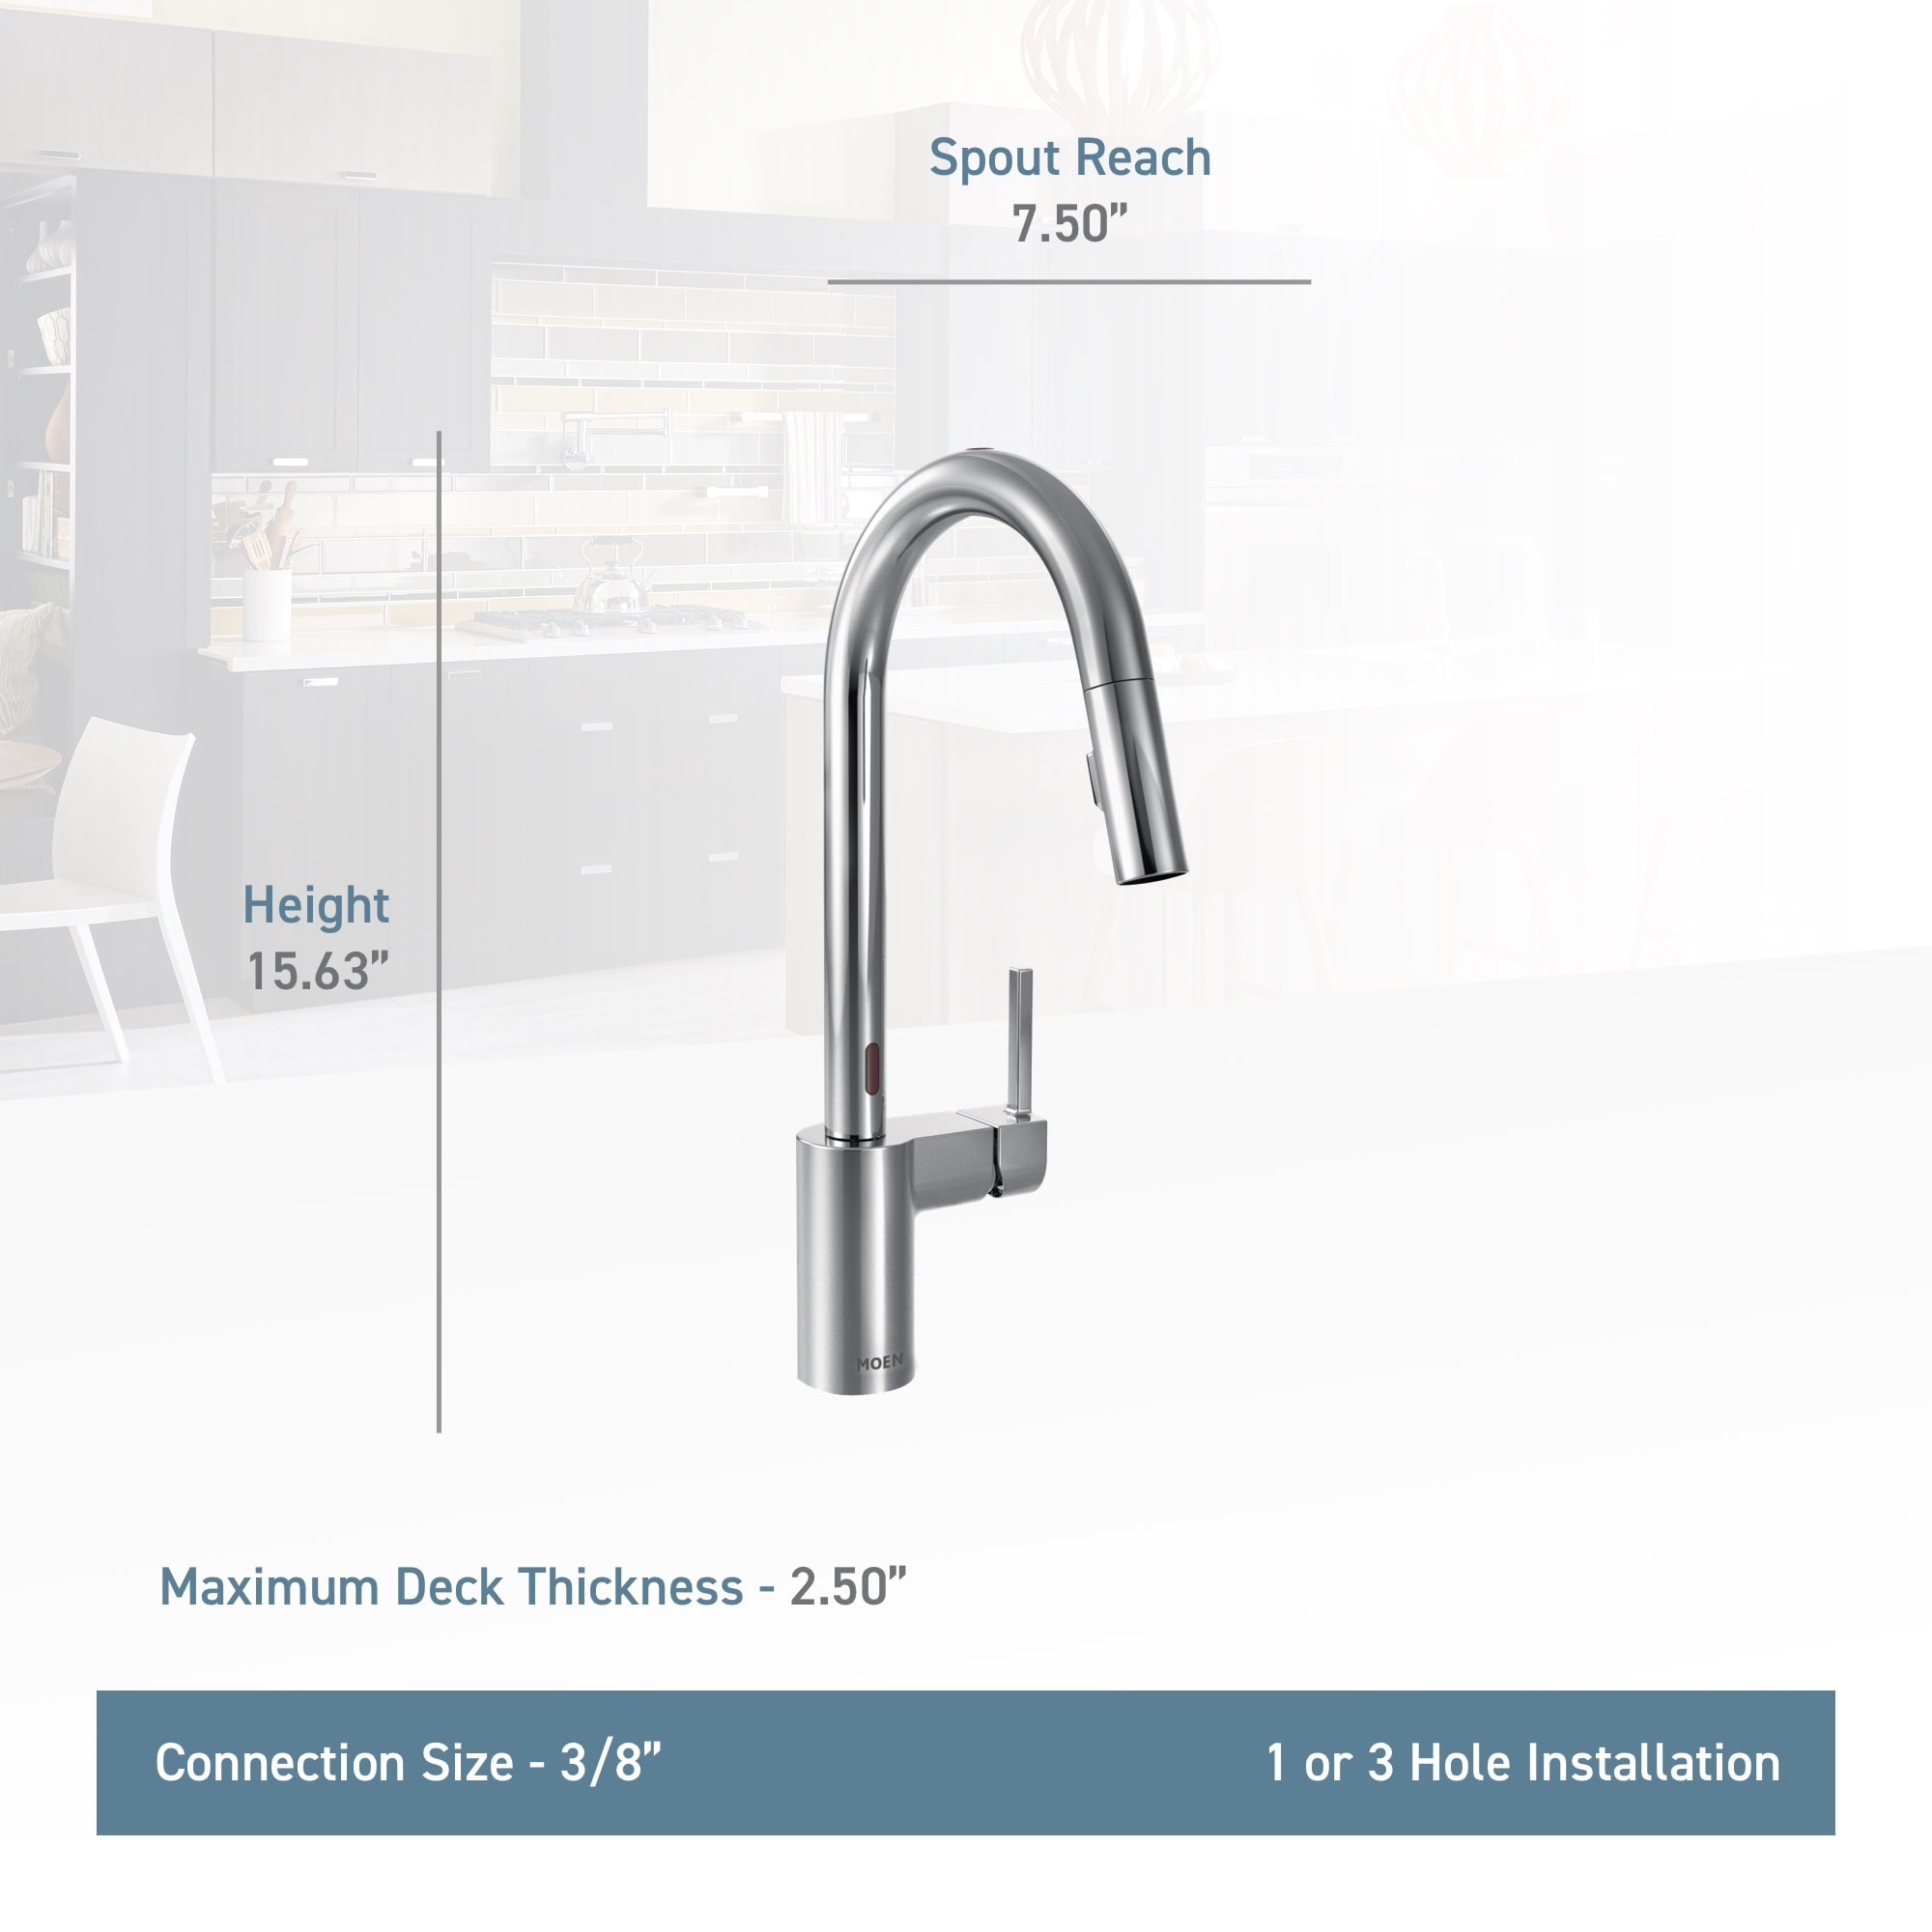 Moen Touch Kitchen Faucet - Moen 87014ewsrs Stainless Steel Kitchen Faucet With Motion Sense Wave For Sale Online Ebay : Moen 7185e single handle touchless pullout spray kitchen faucet with reflex and motionsense technologies moen motionsense faucet org sensor not working basin faucet automatic hands touch.